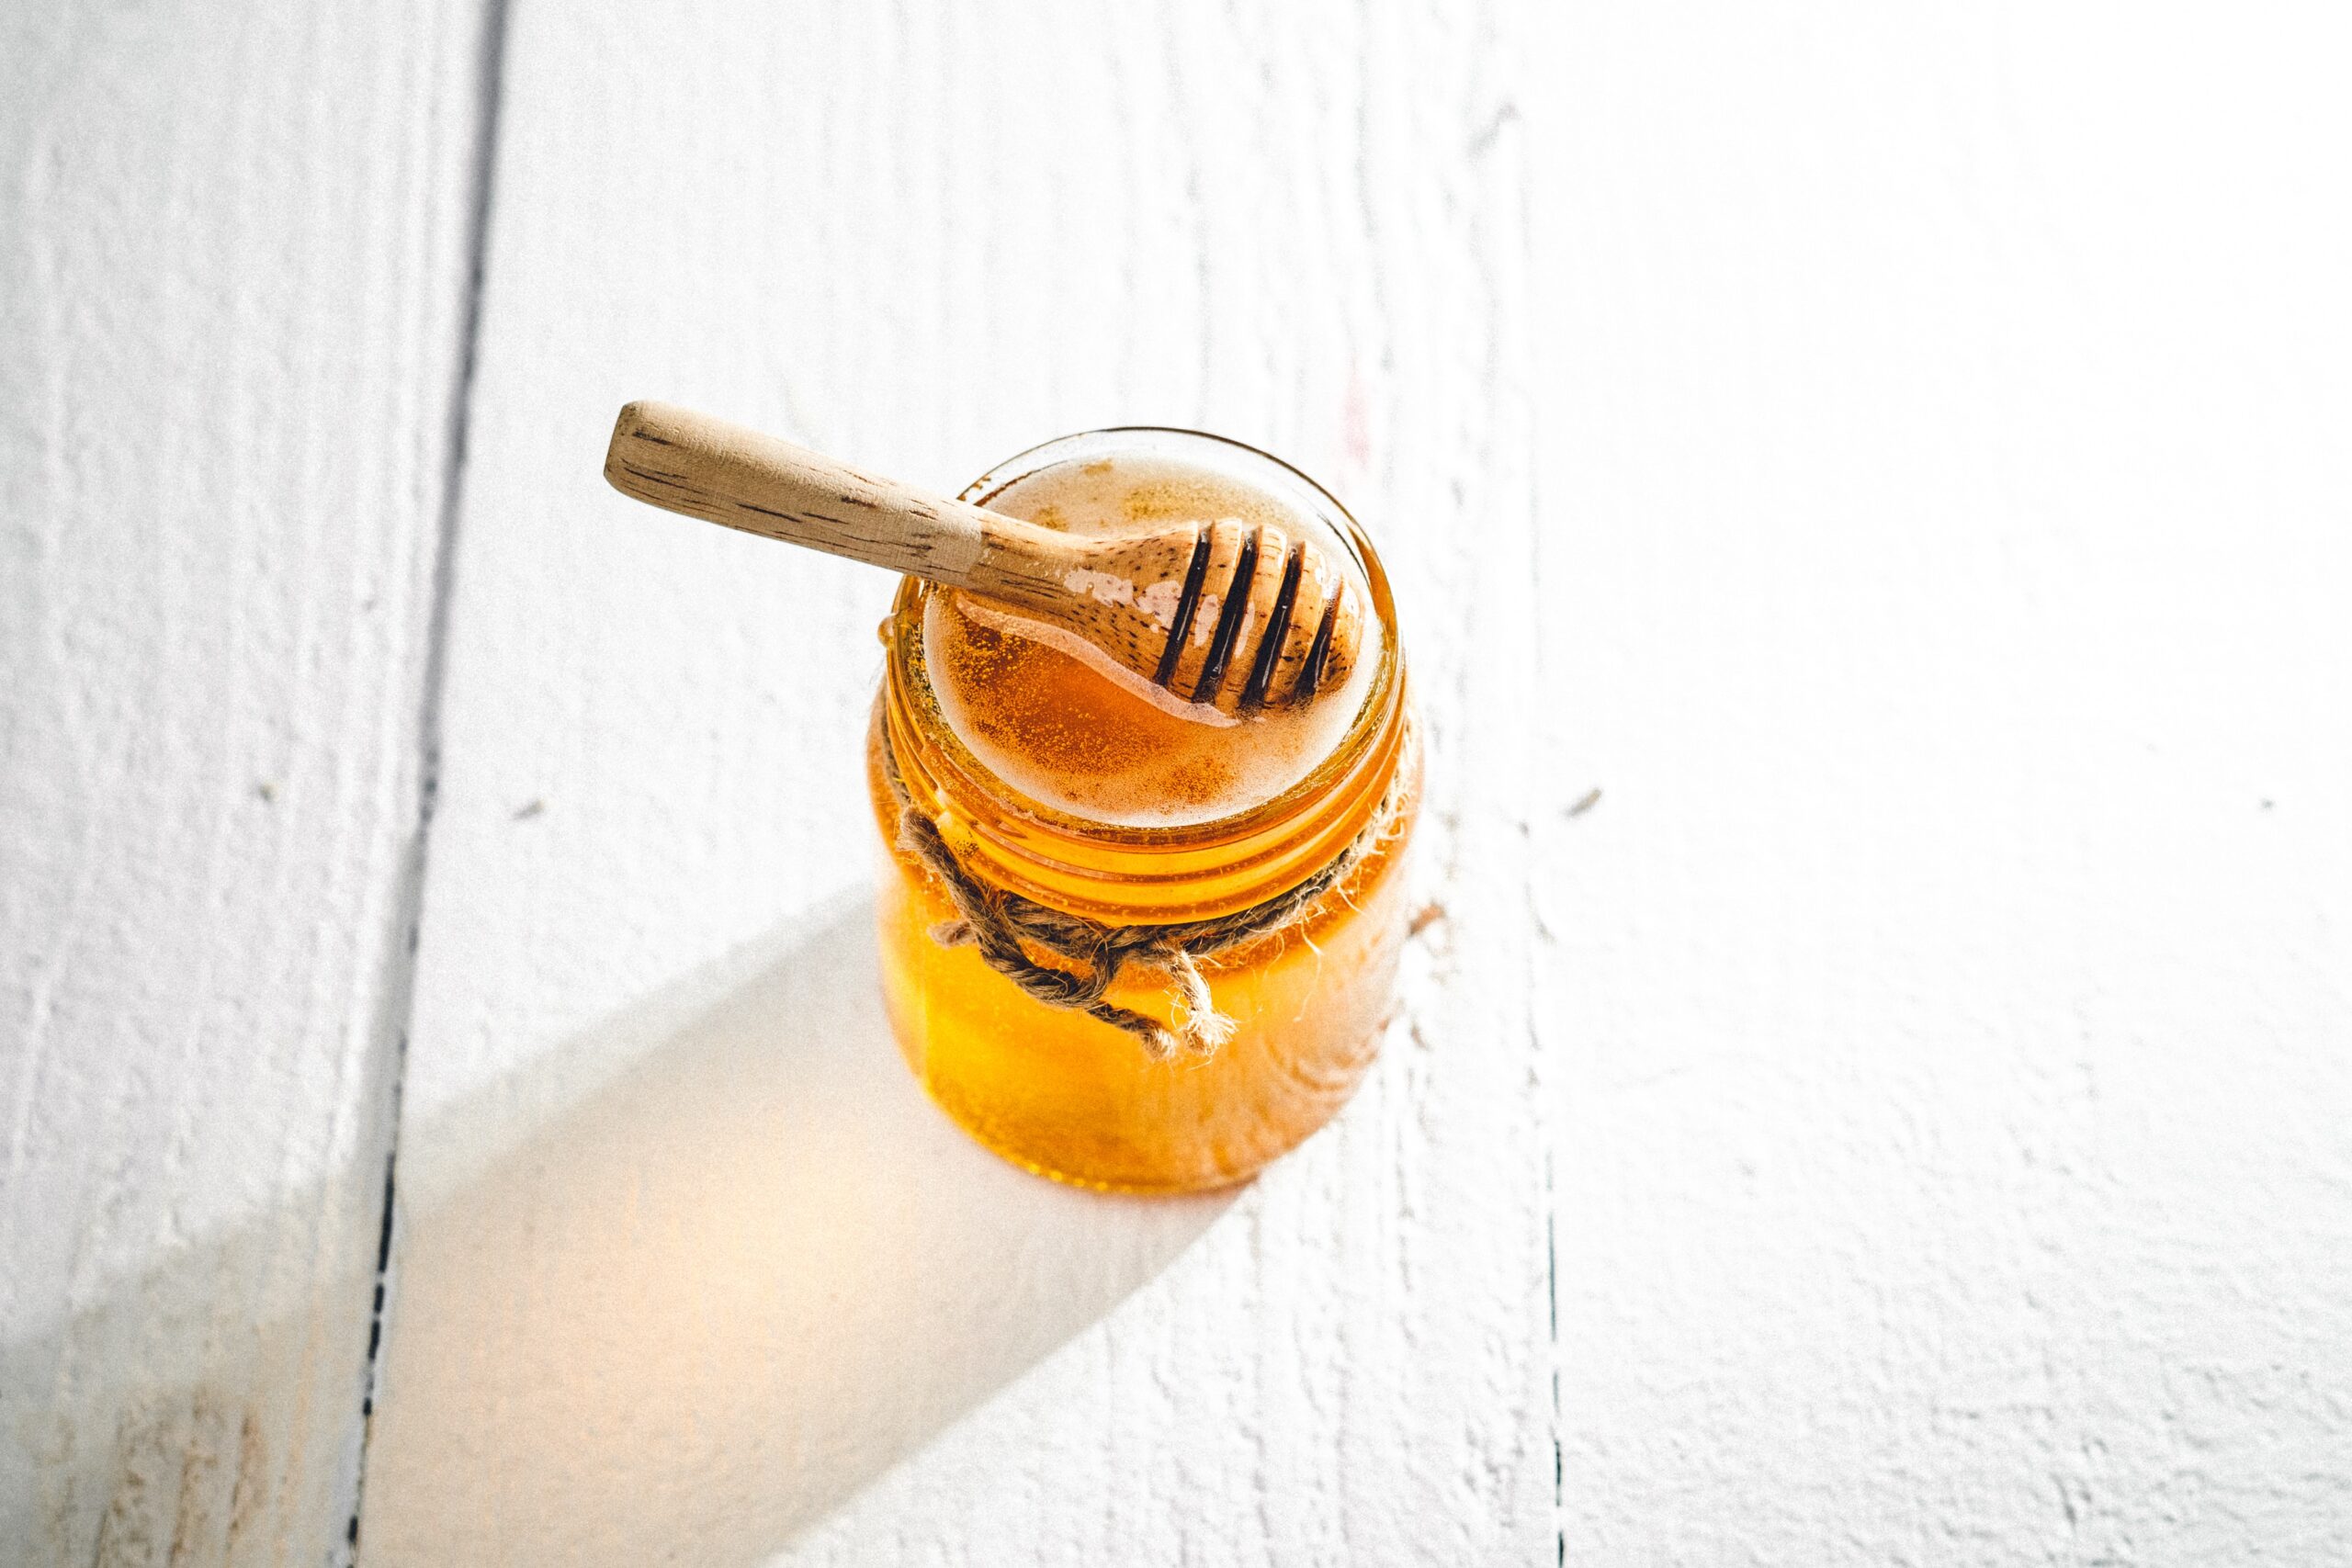 A wooden honey dipper sits atop a clear glass jar filled with honey